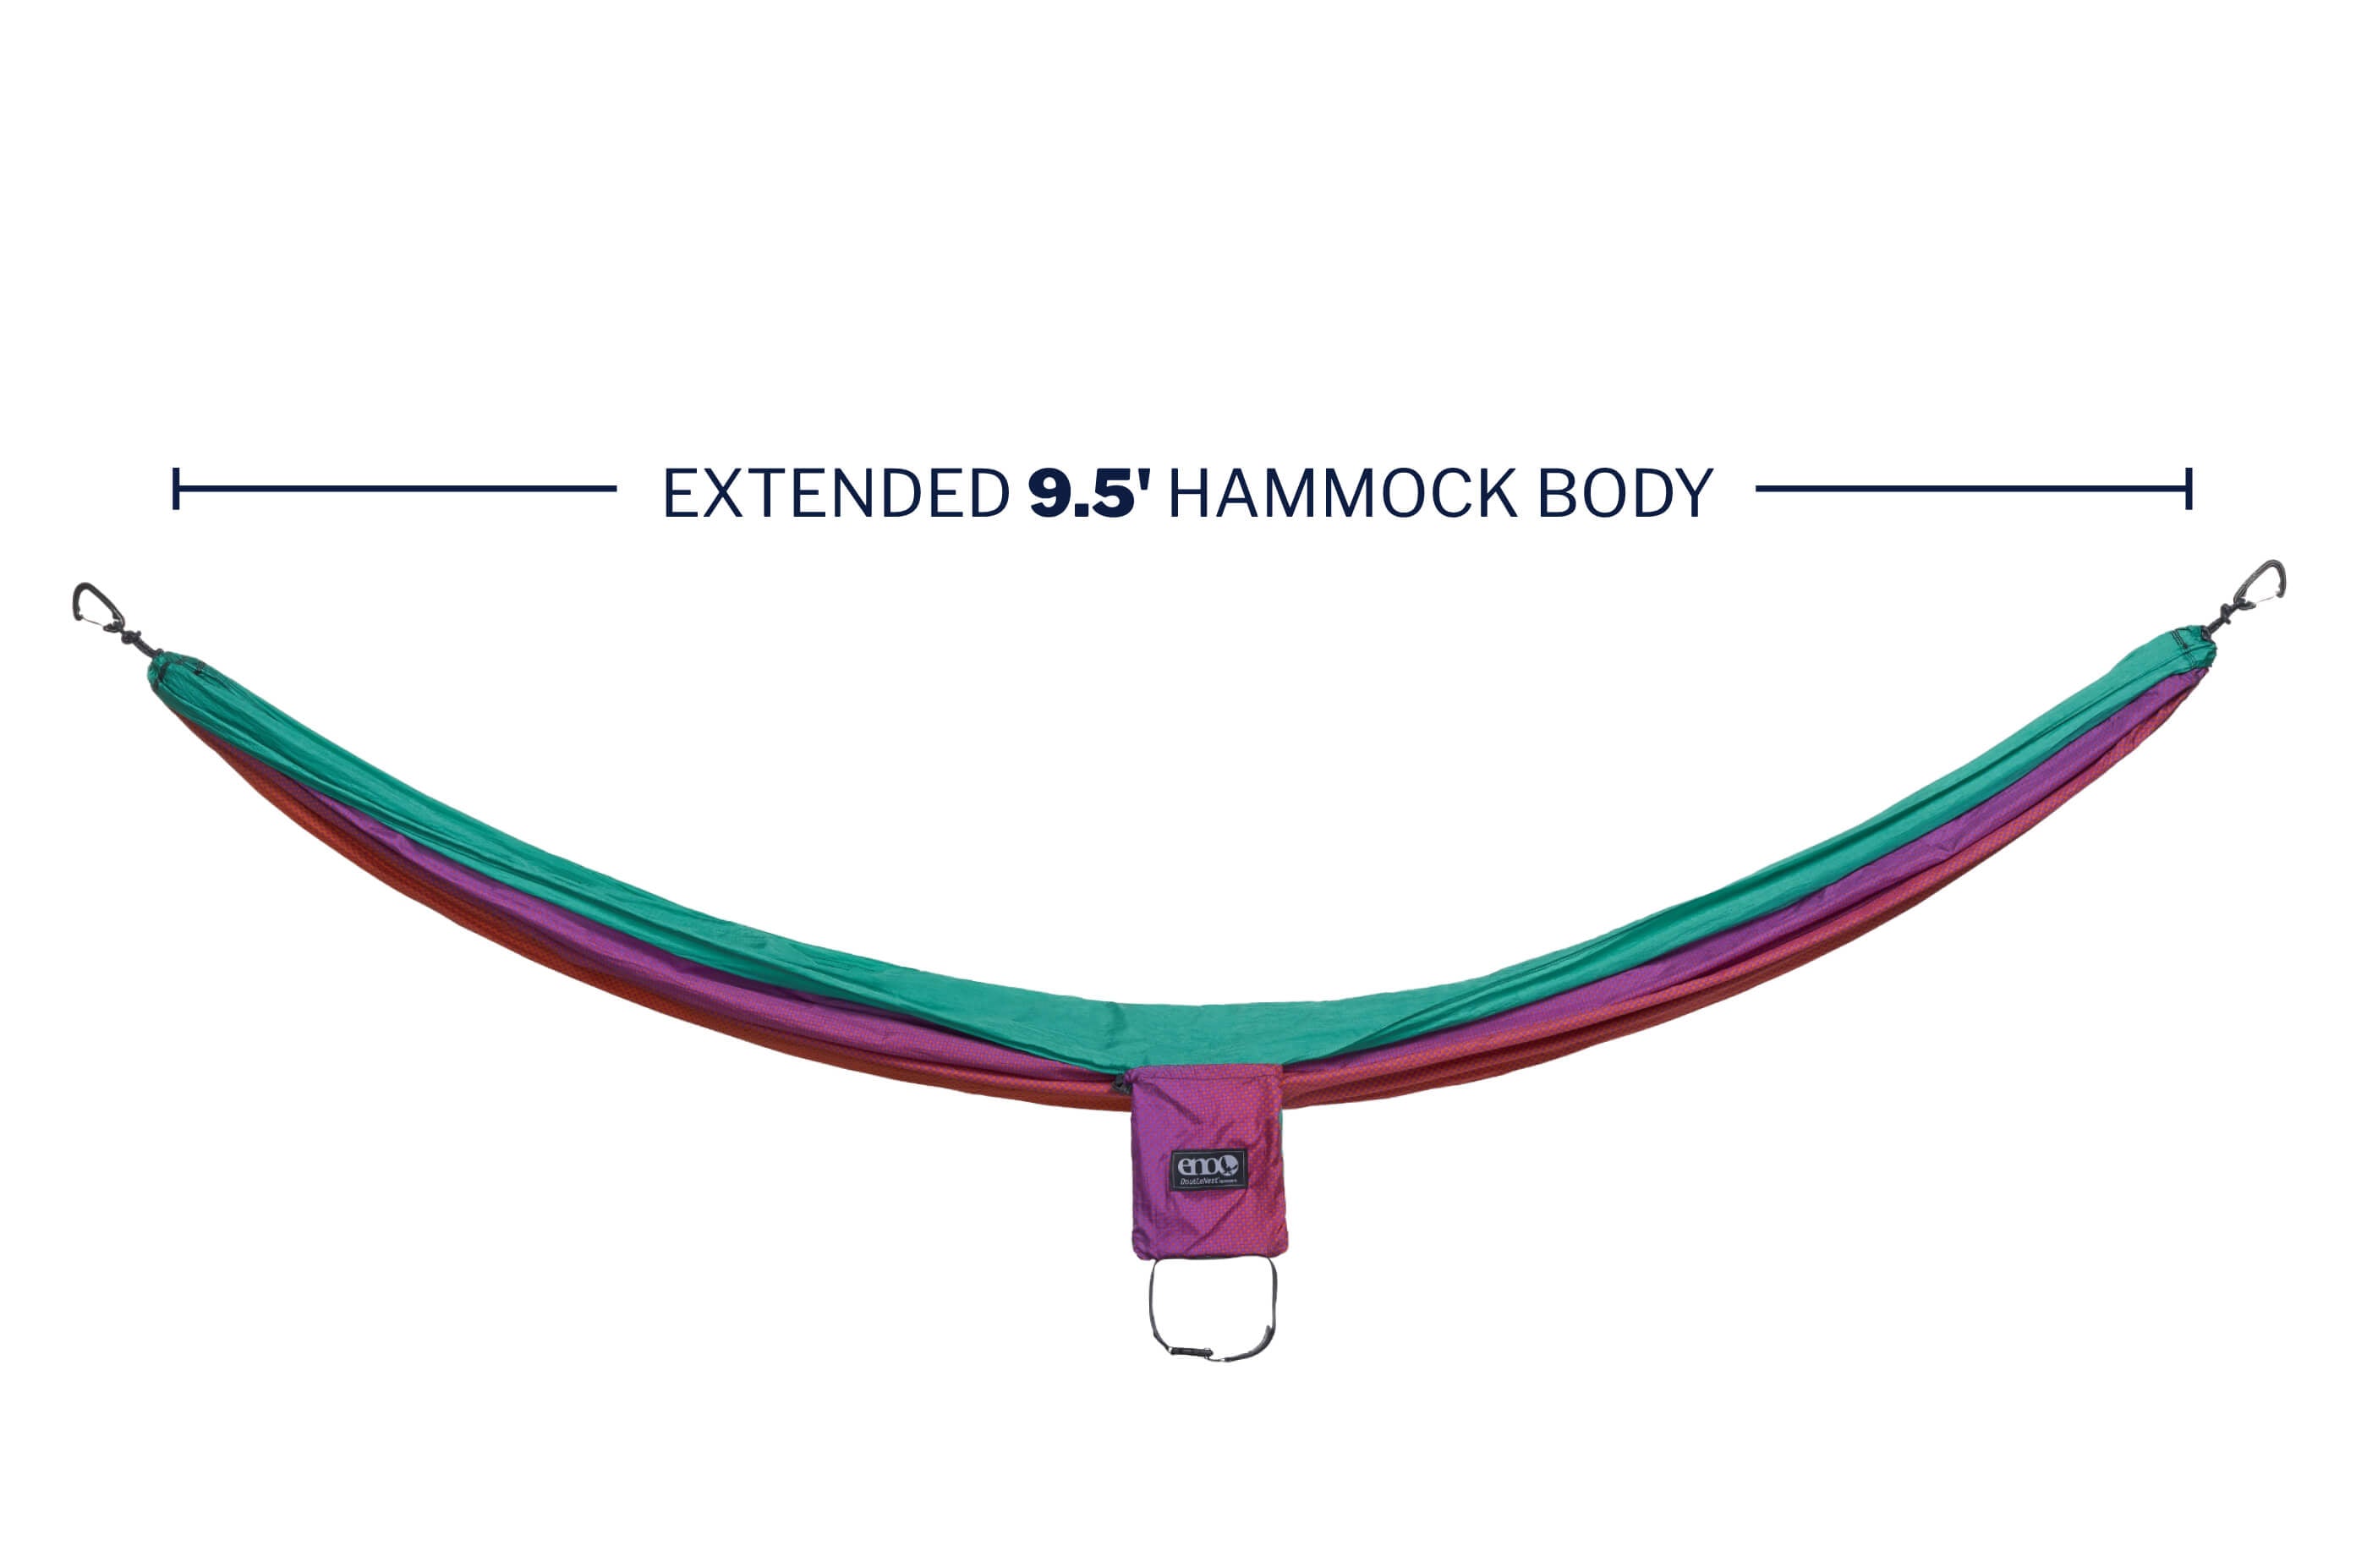 sideway view of DoubleNest hammock with 9.5' hammock body text callout